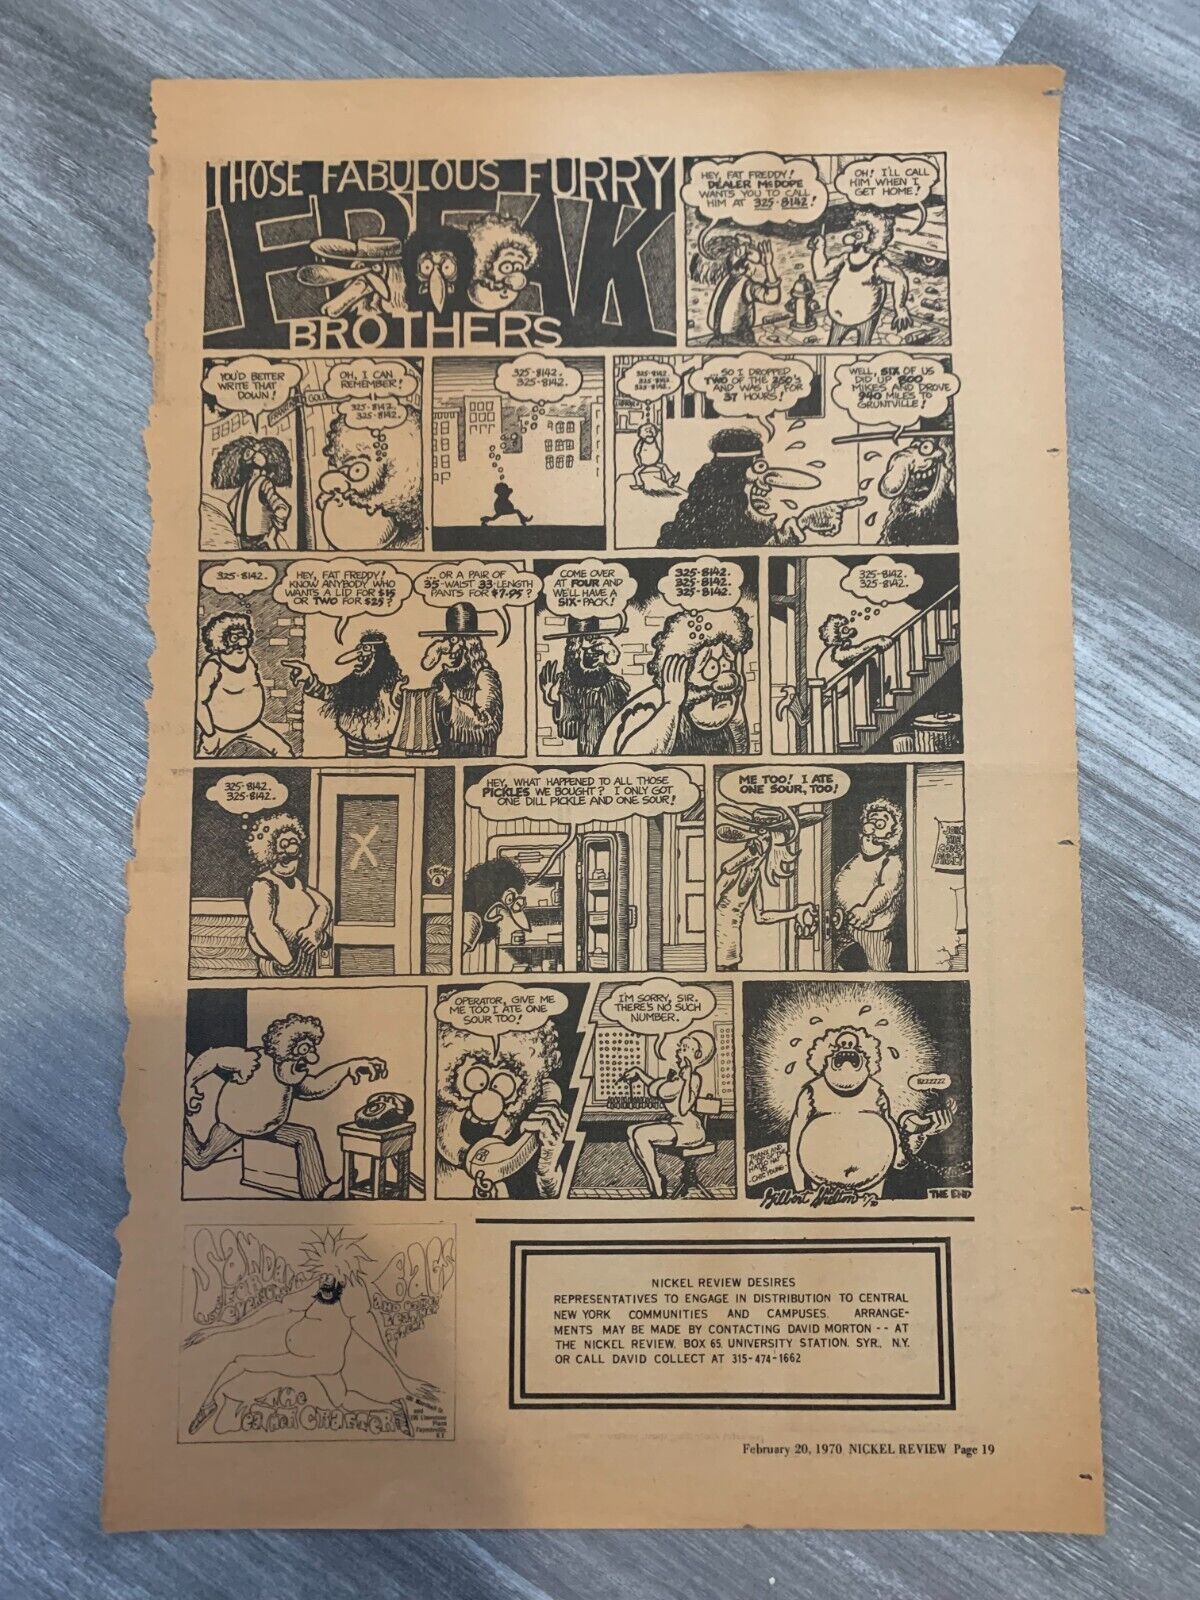 2/20/70 FREAK BROTHERS 11.5x17" Nickel Review Underground Newspaper FULL PAGE